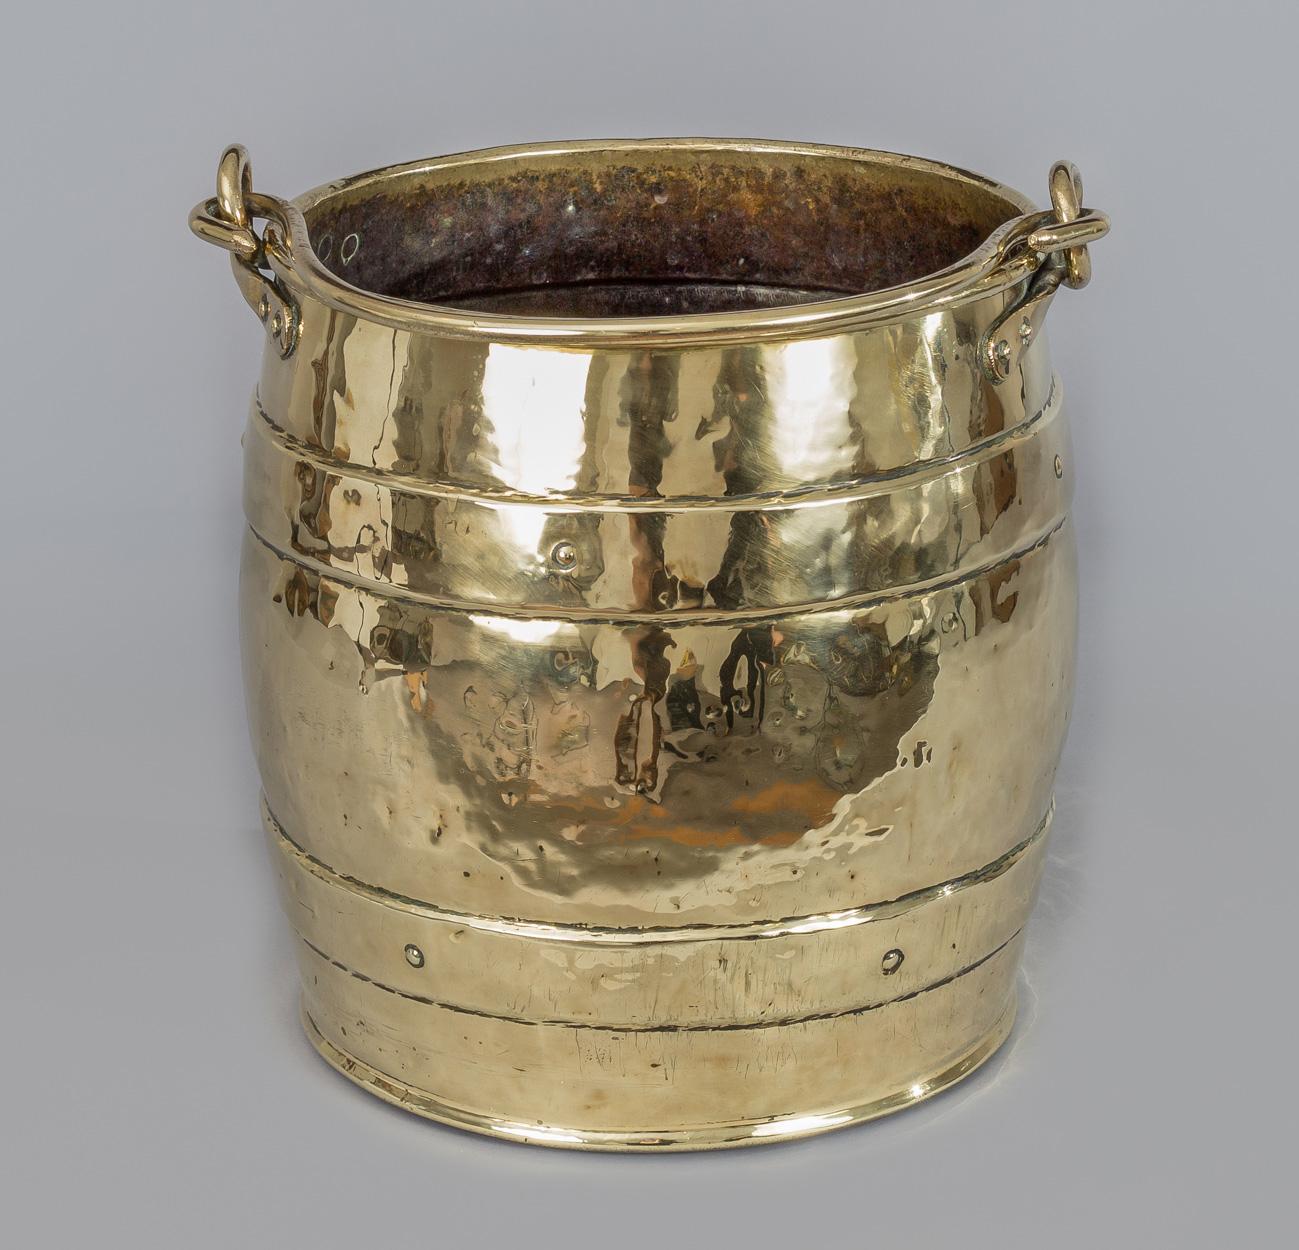 Brass barrel-shaped coal with brass handle.